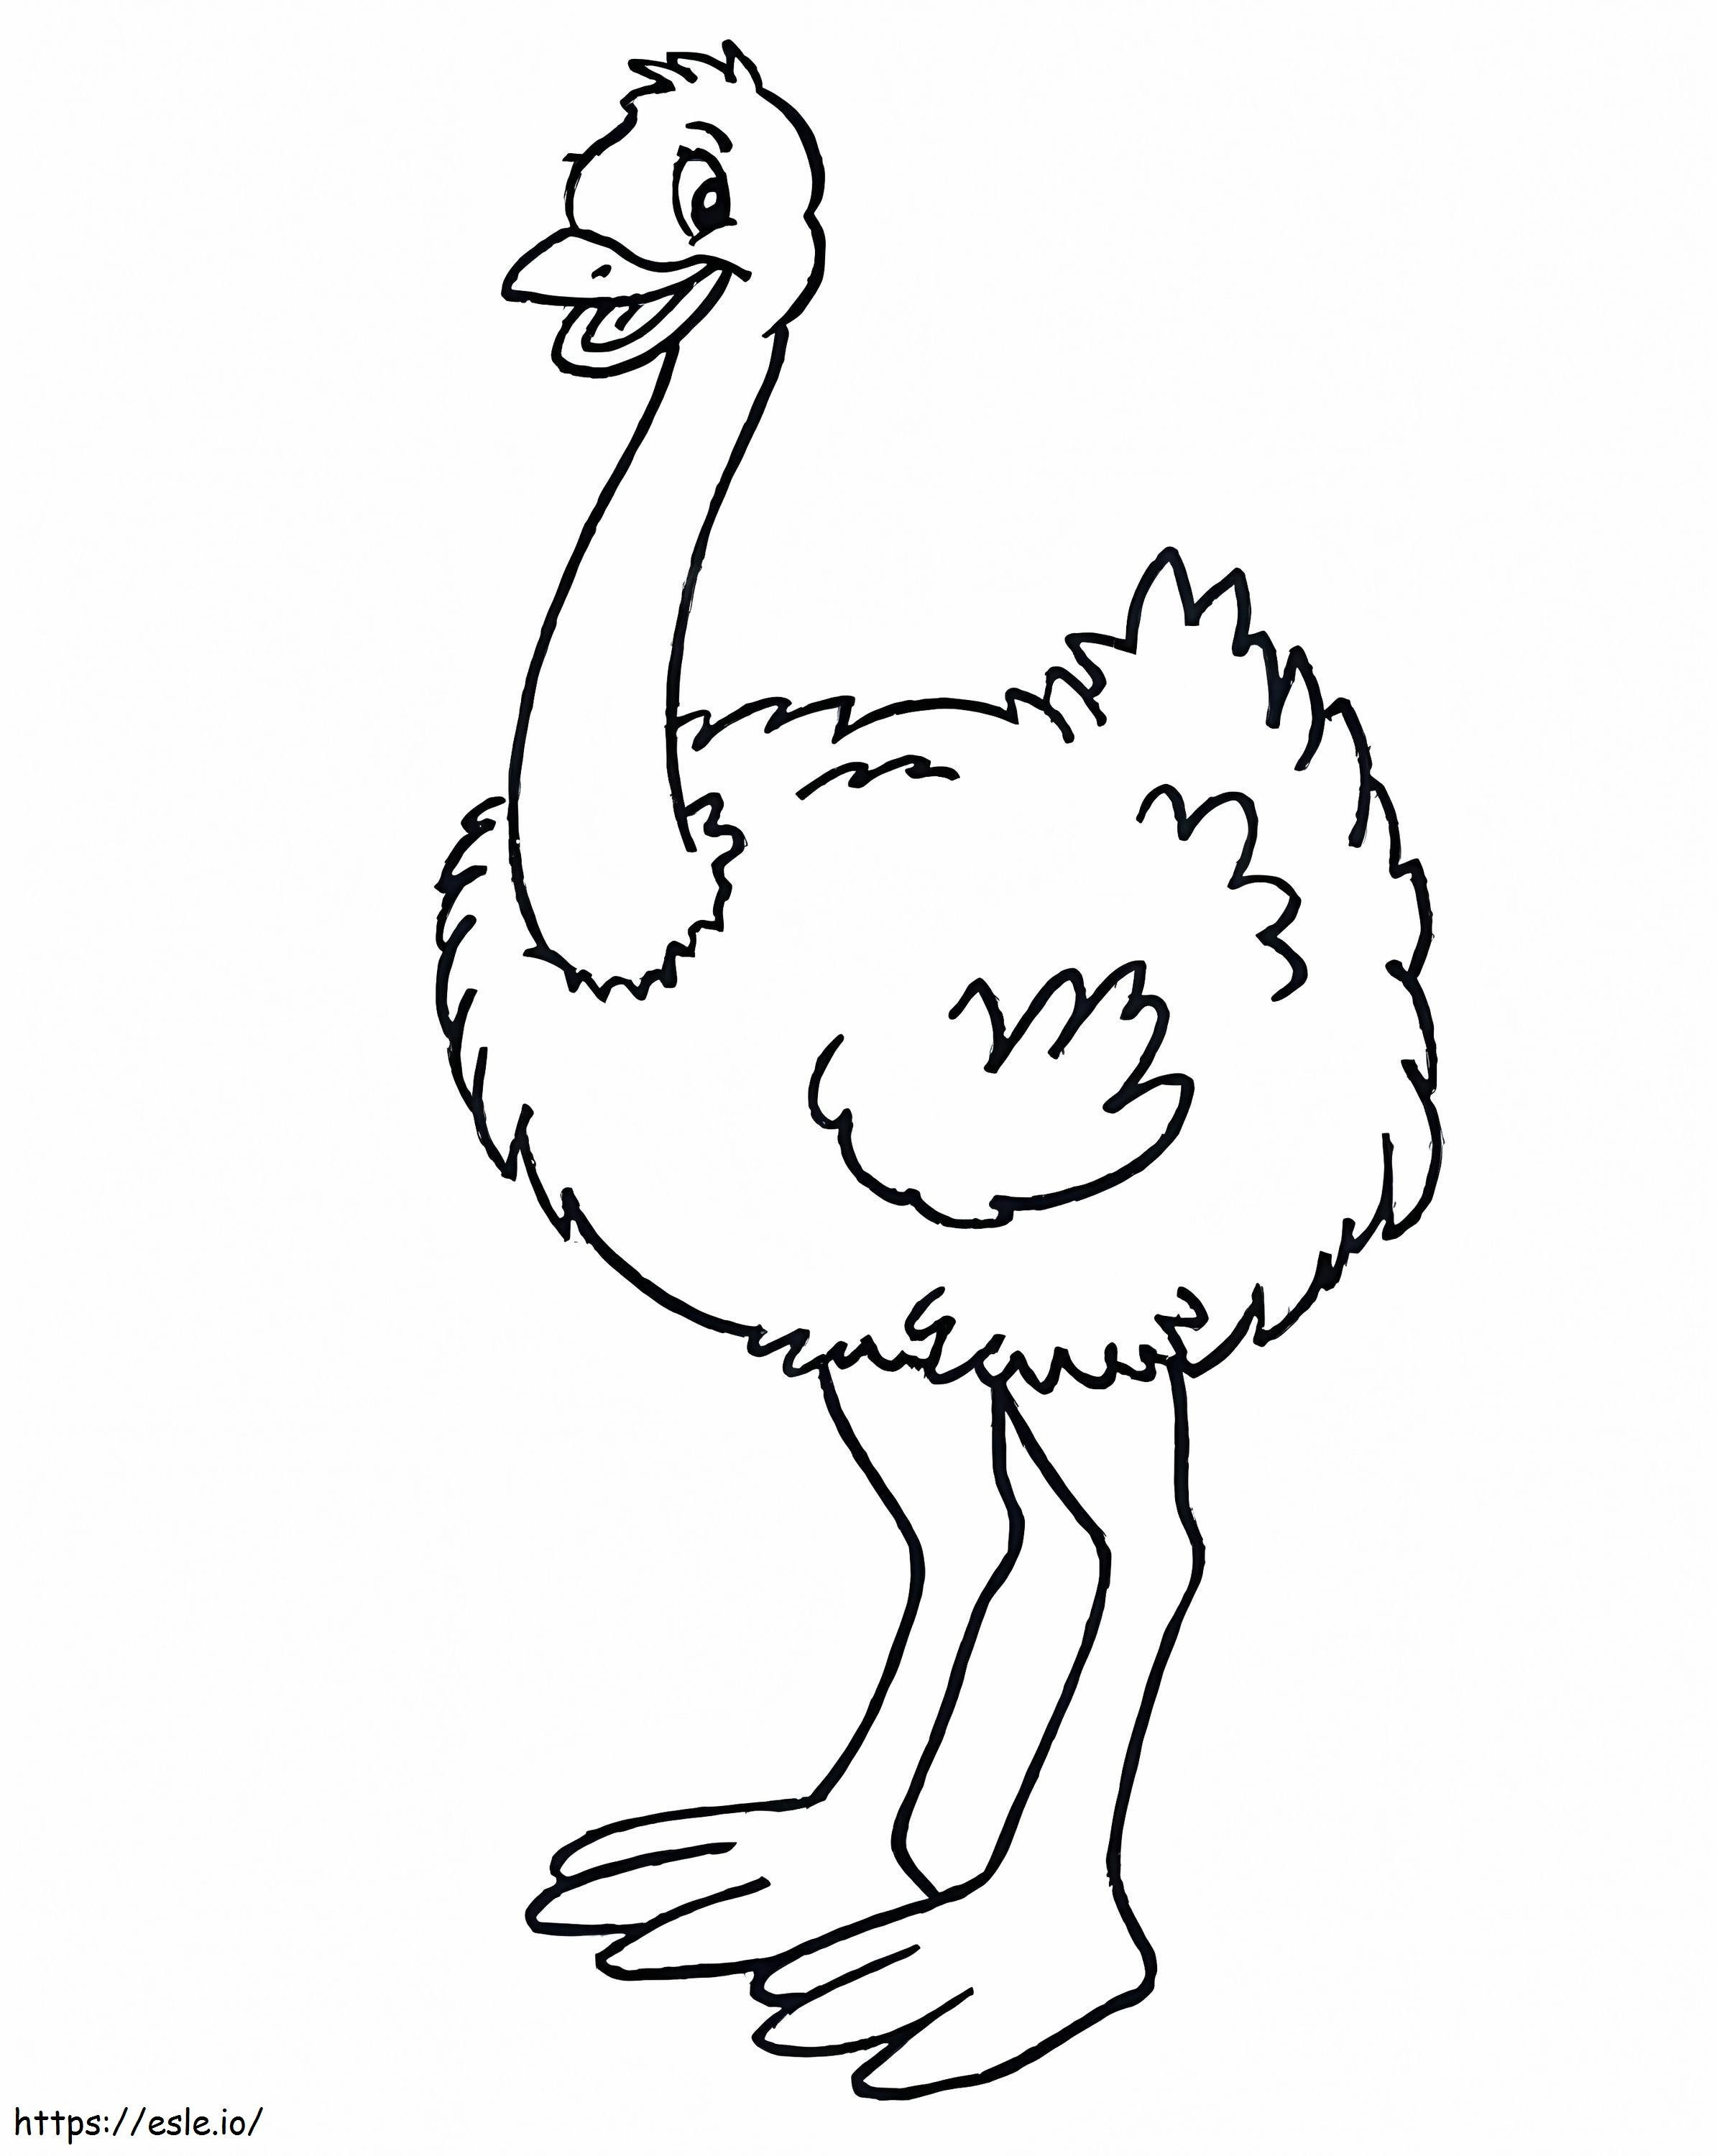 Ostrich Is Smiling coloring page